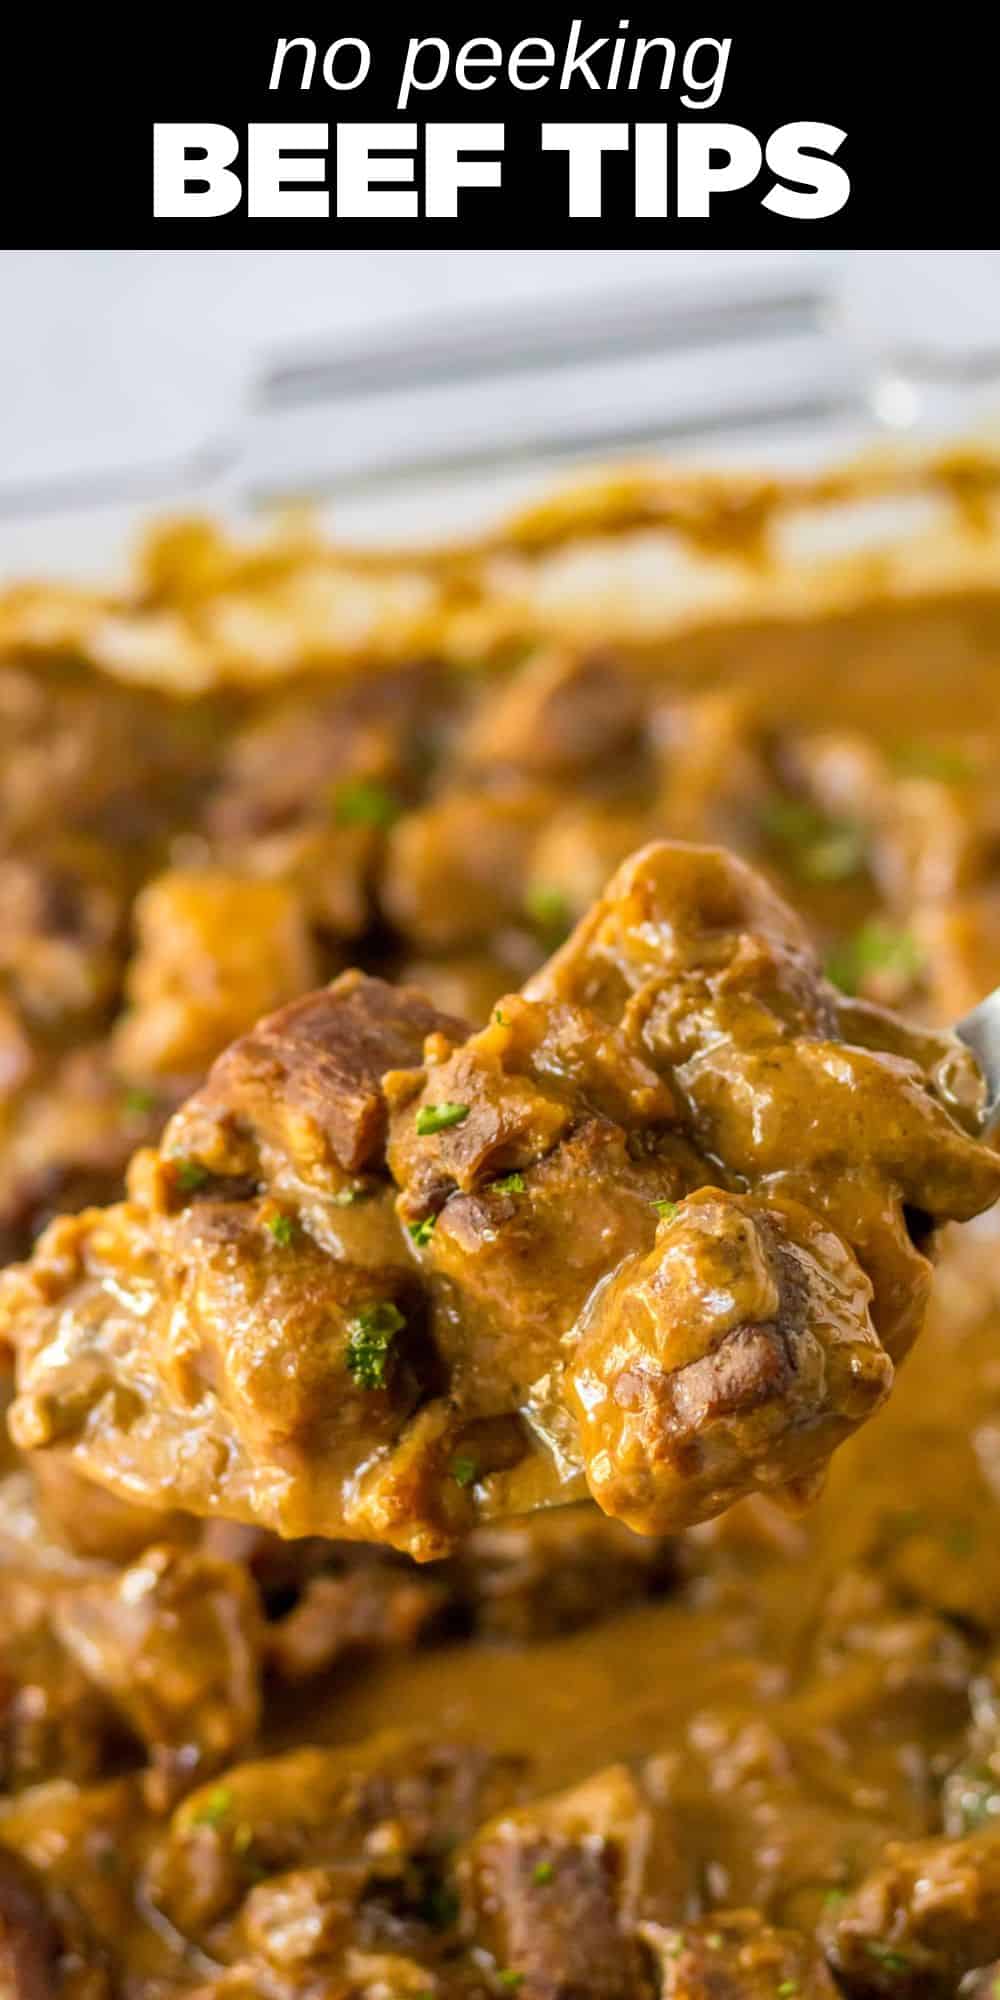 These oven-cooked Beef Tips with savory gravy make for a scrumptious and easy dinner the whole family will love. And the great thing is that they only take five minutes of prep time and they're ready to pop in the oven. 